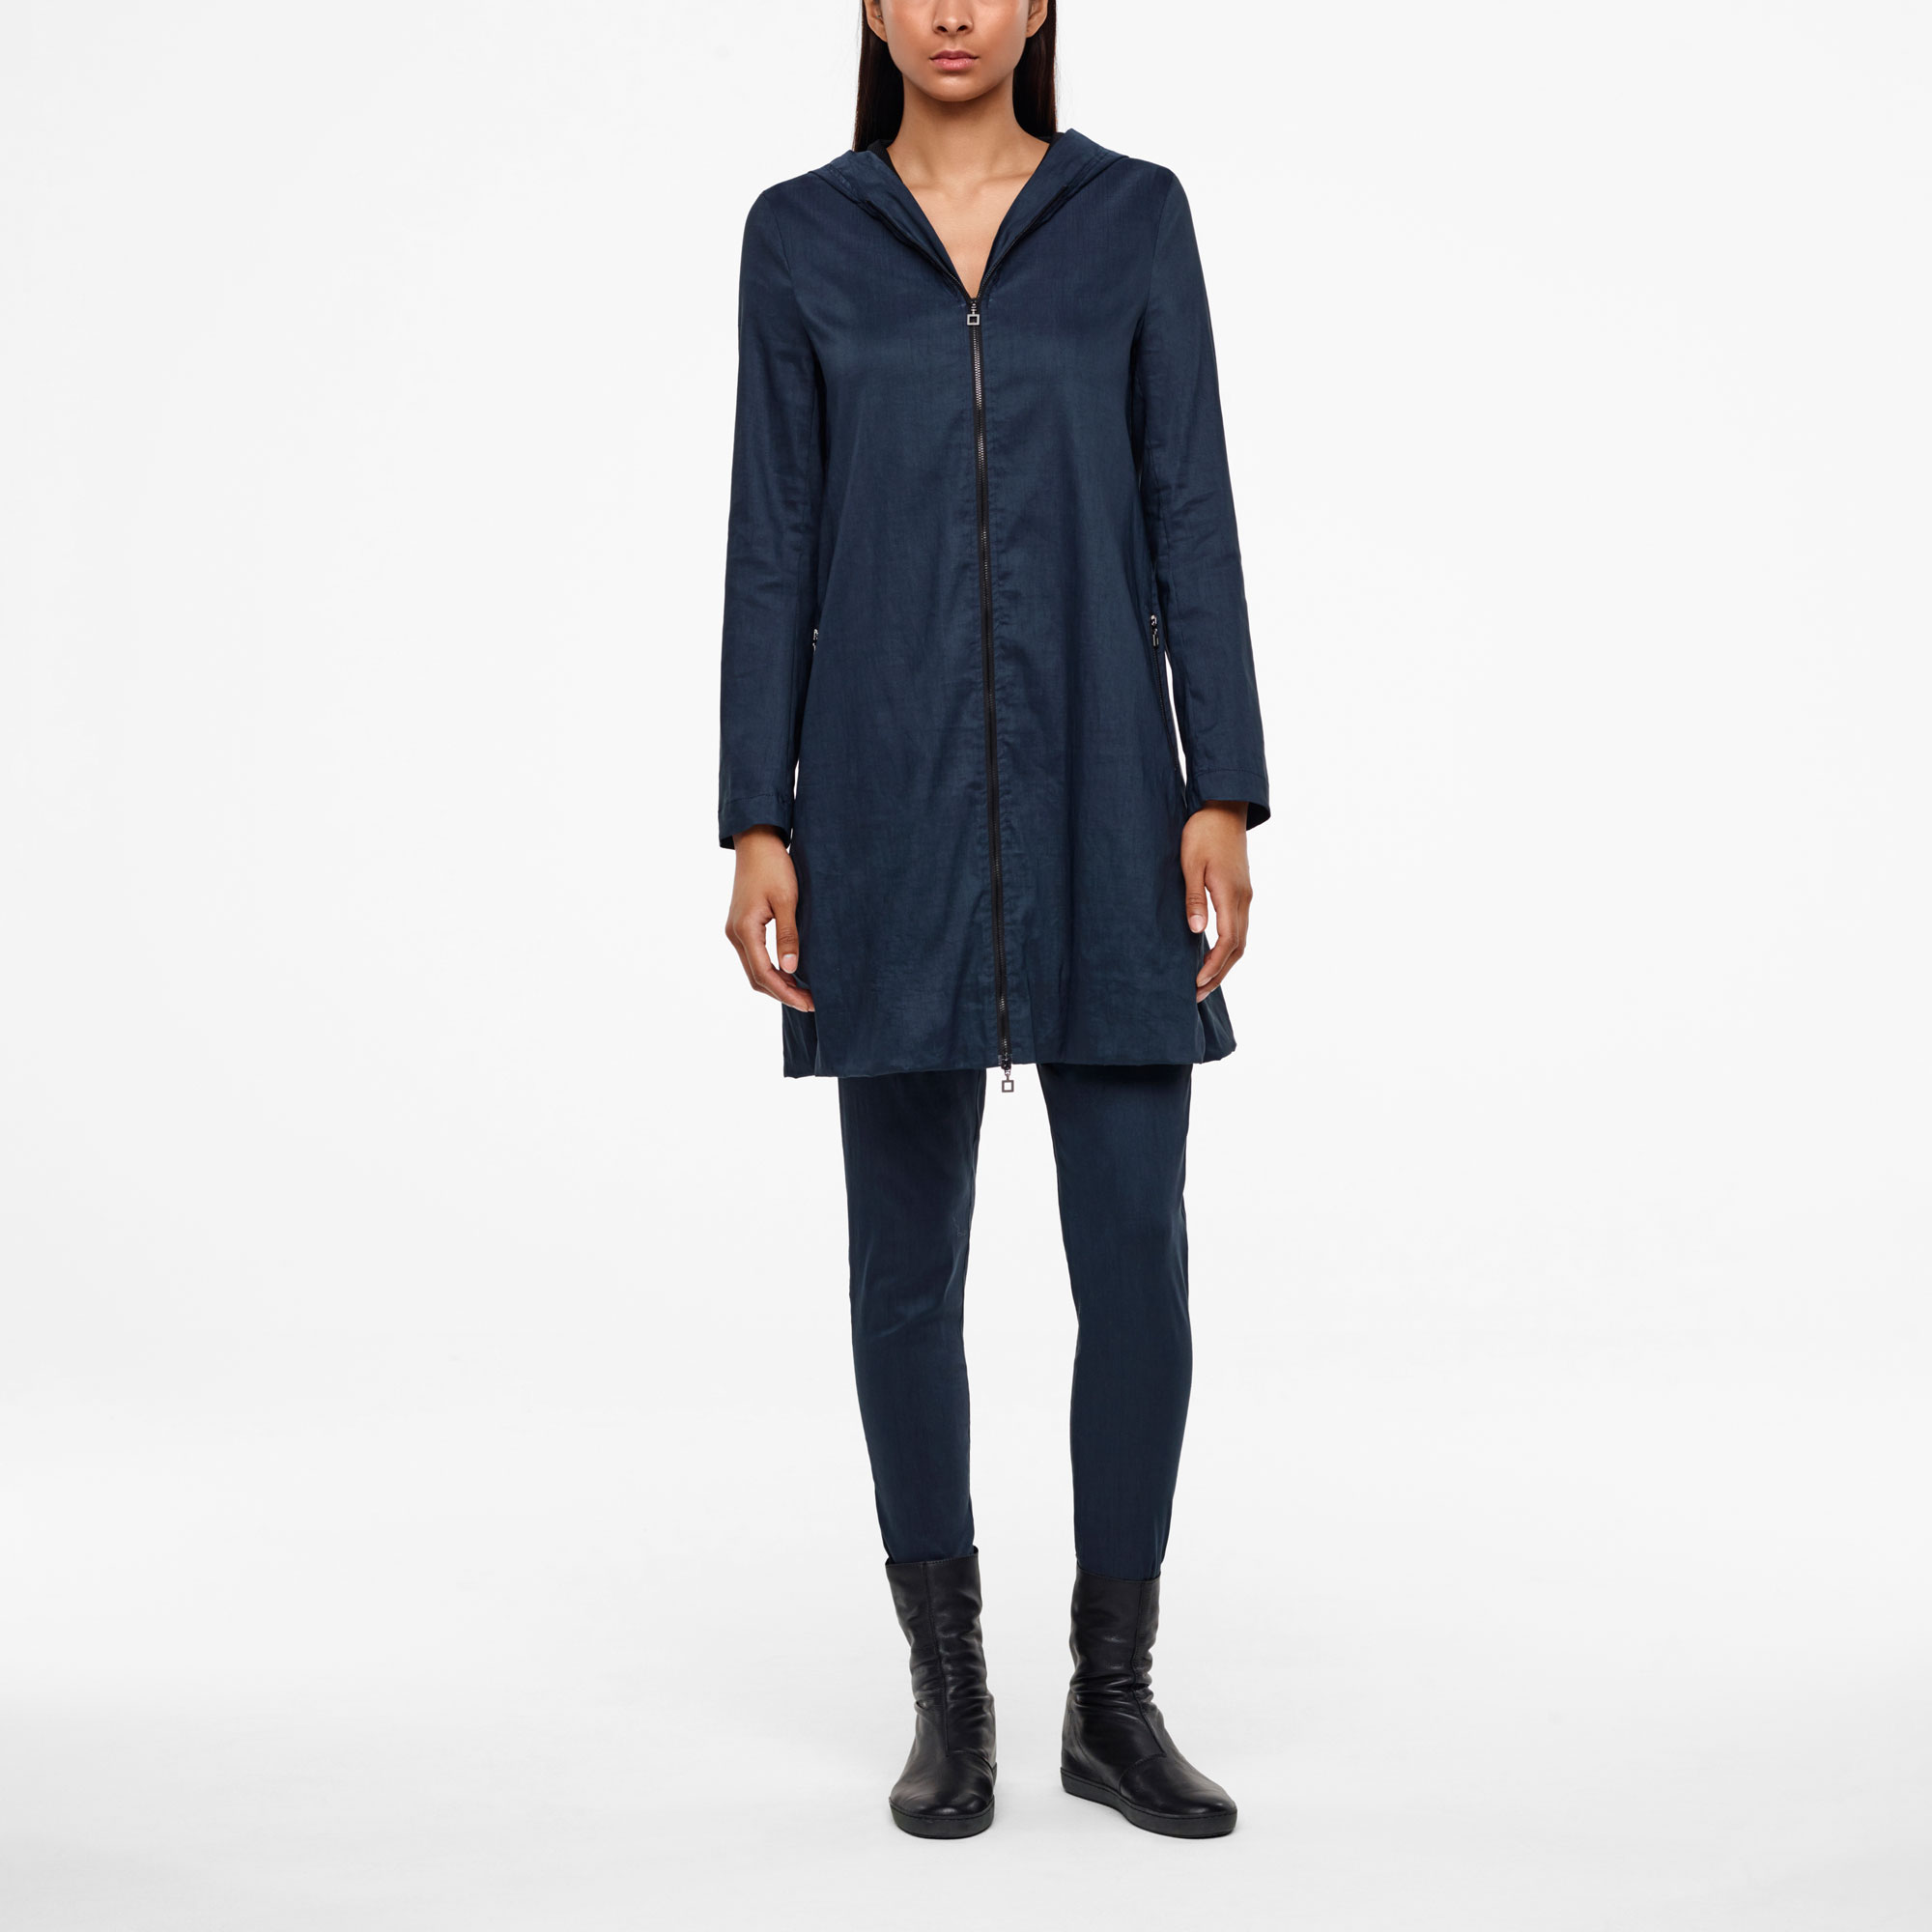 Grey single-breasted linen trench coat by Sarah Pacini